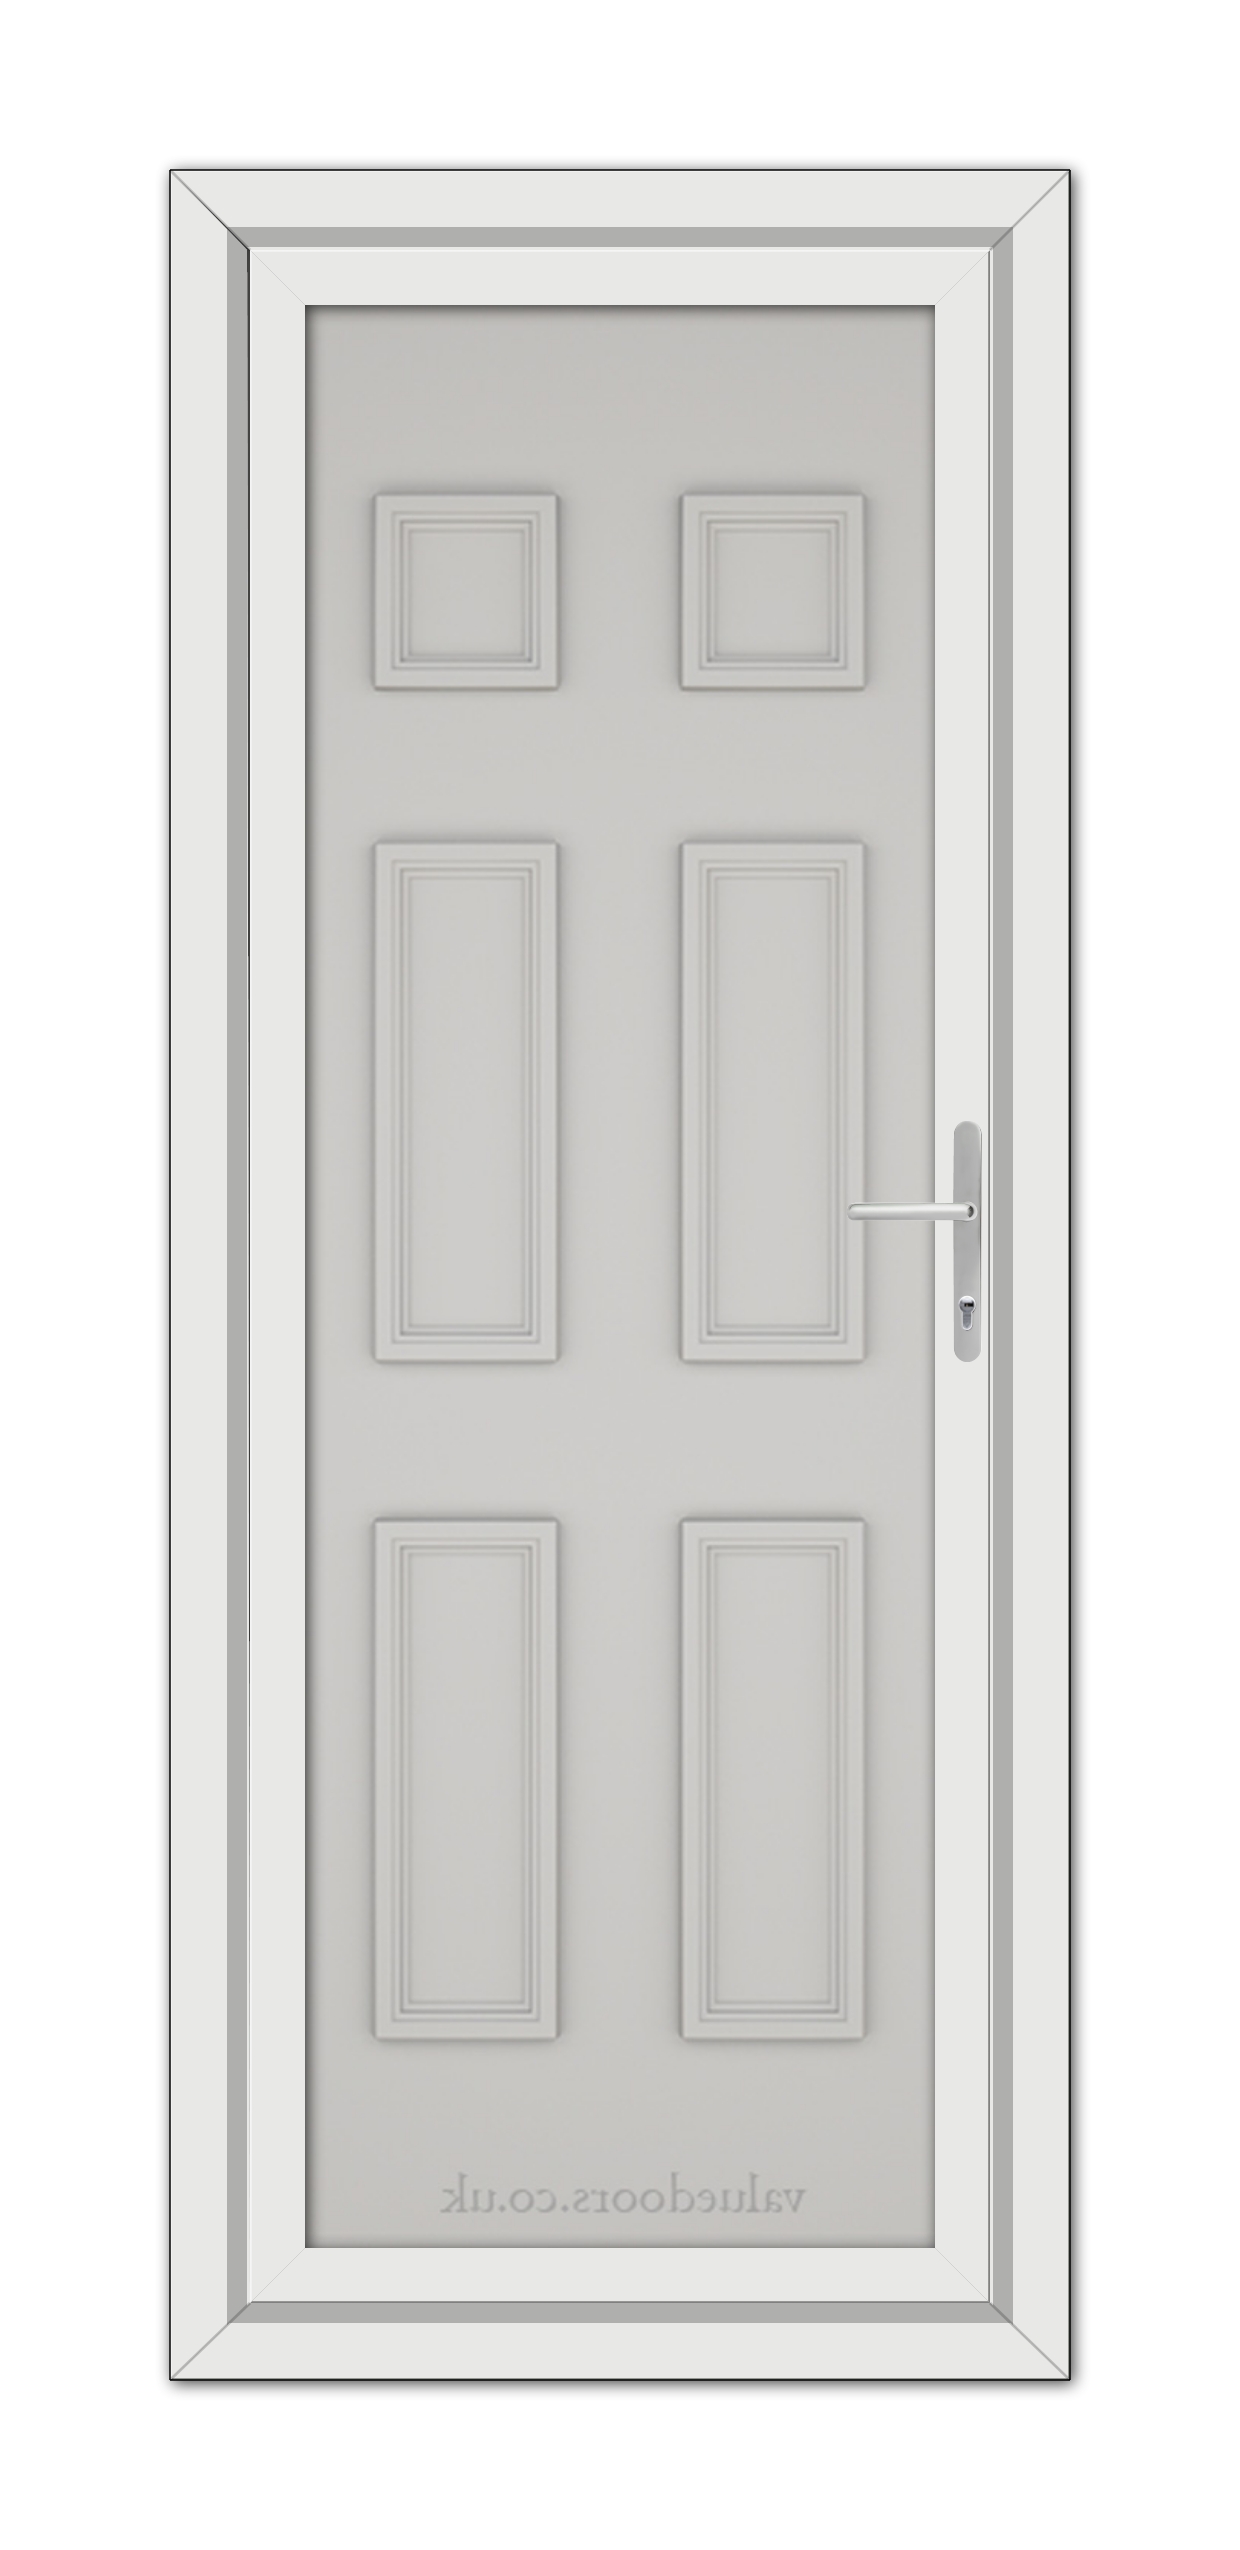 A vertical image of a closed, Silver Grey Windsor Solid uPVC Door with a metallic handle on the right side, set within a simple frame.